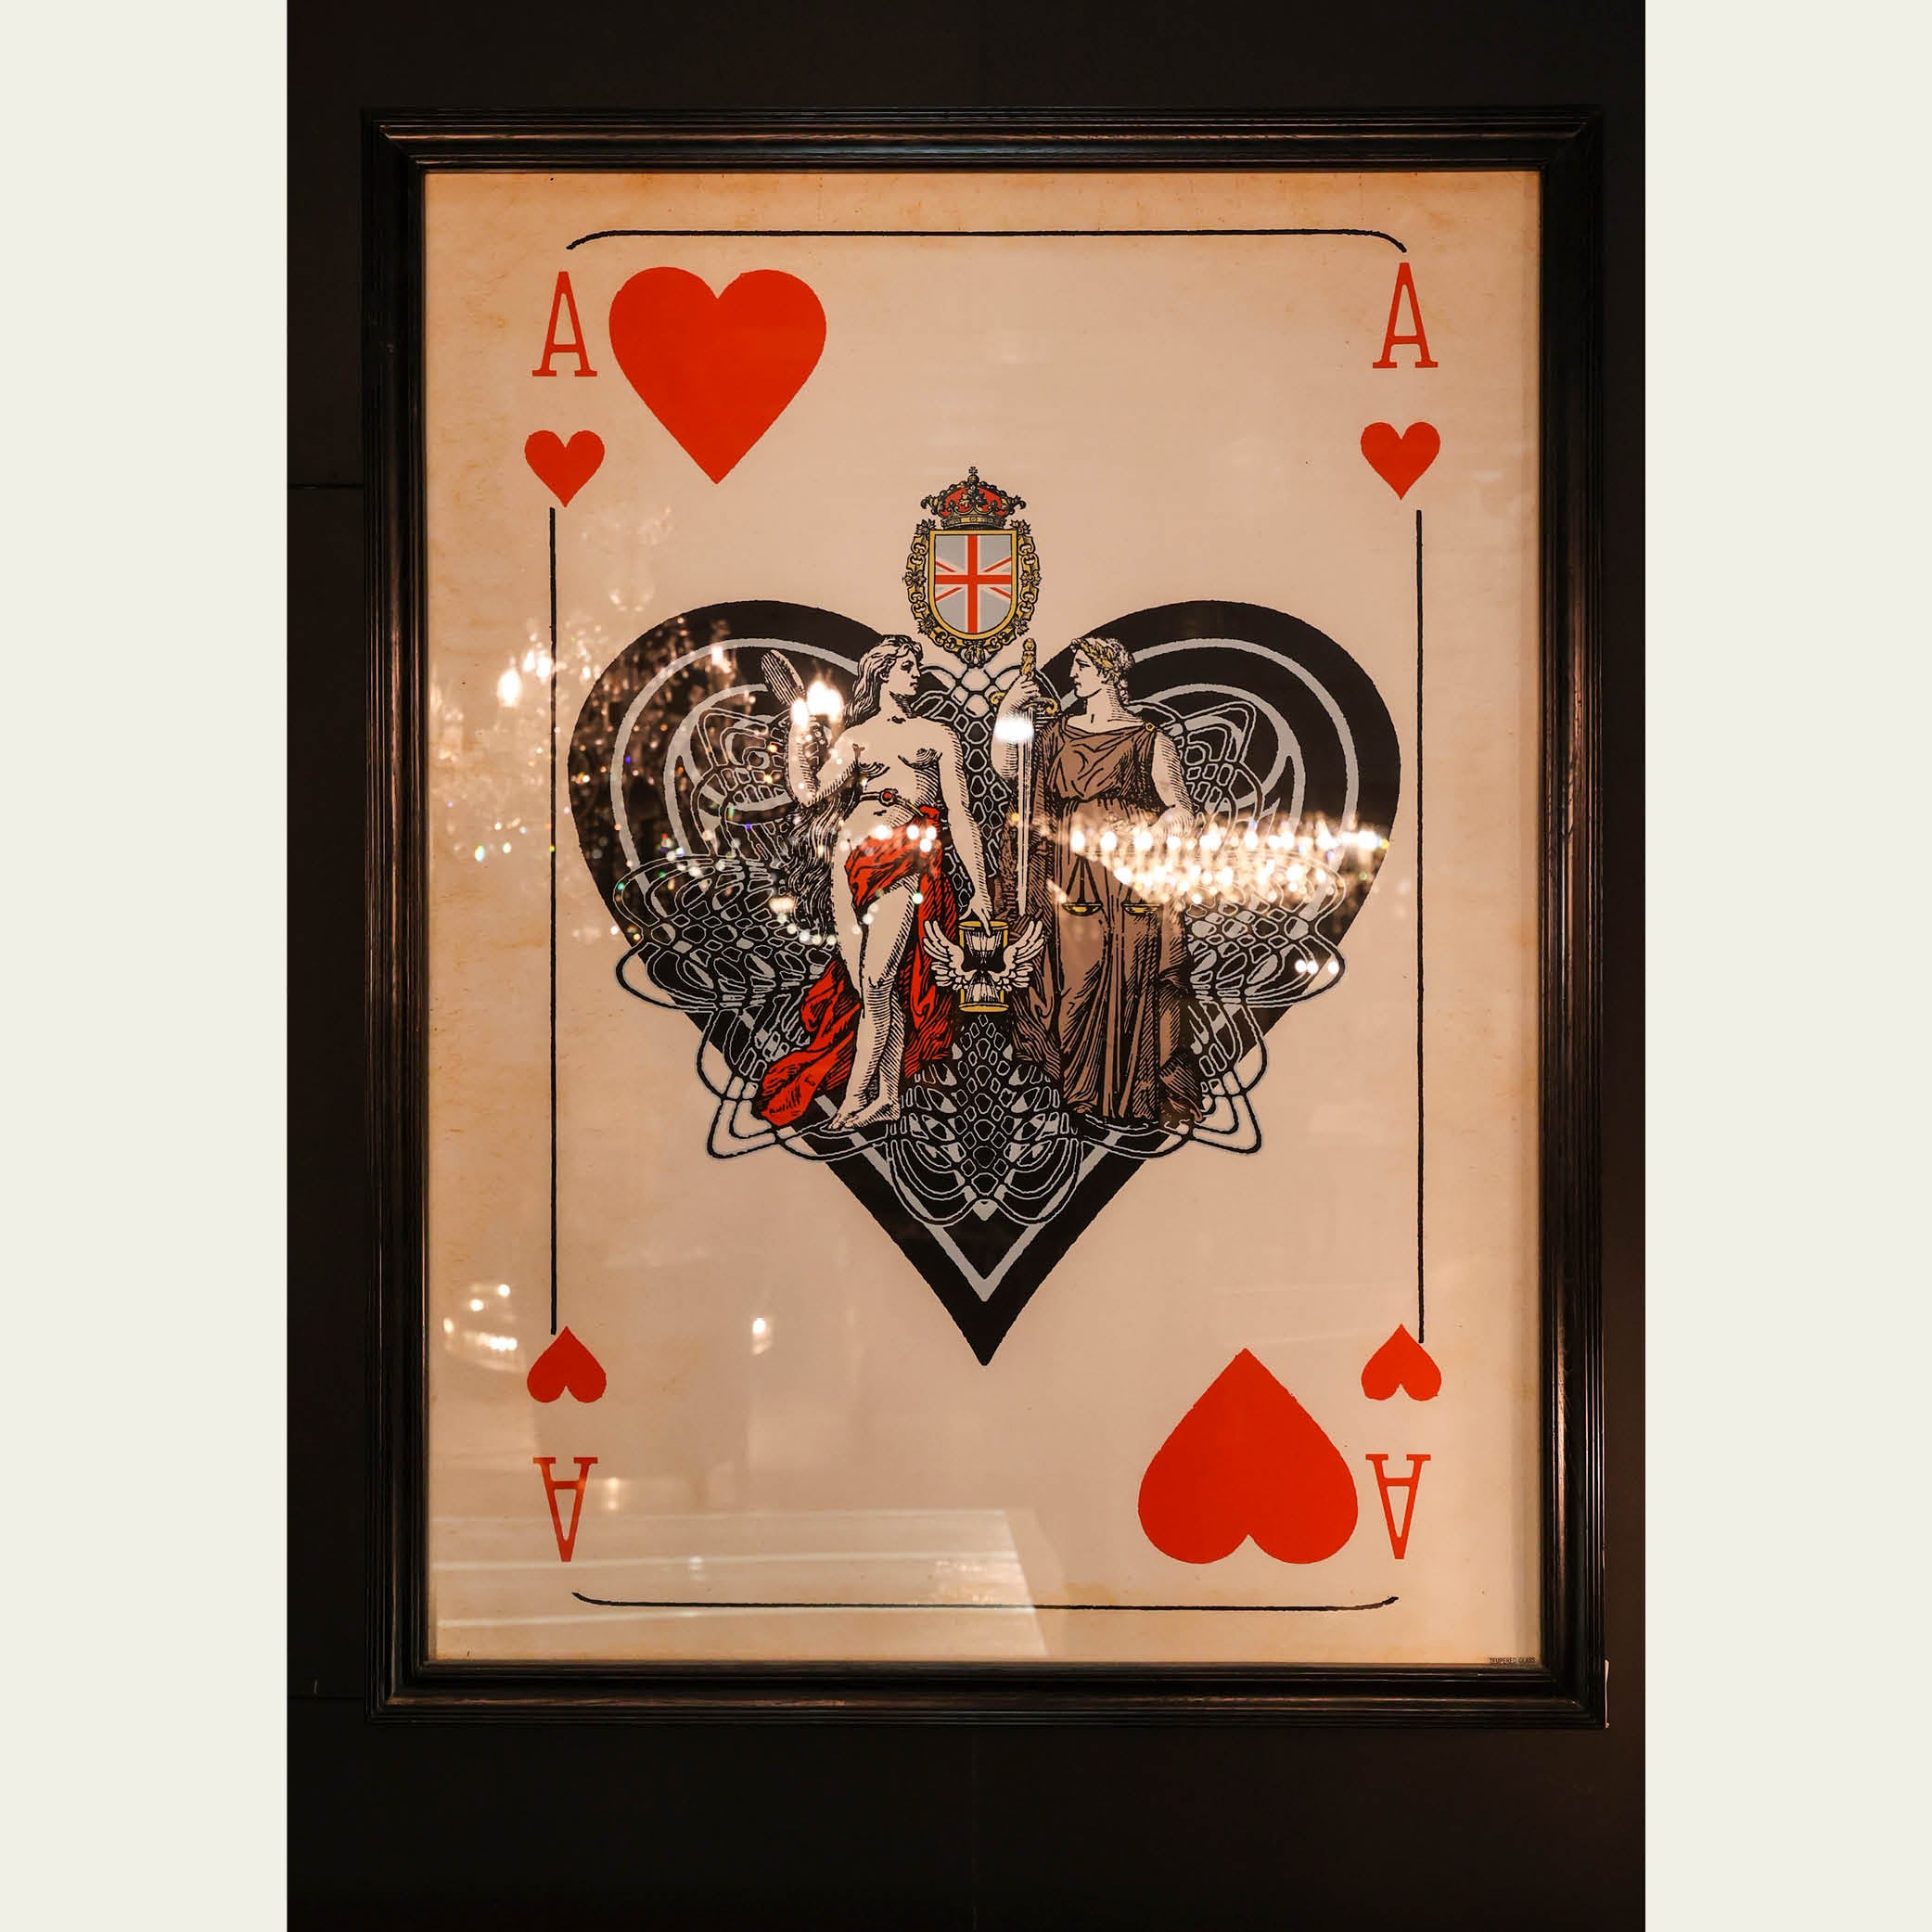 EXPO Timothy Oulton CARDS ACES Image